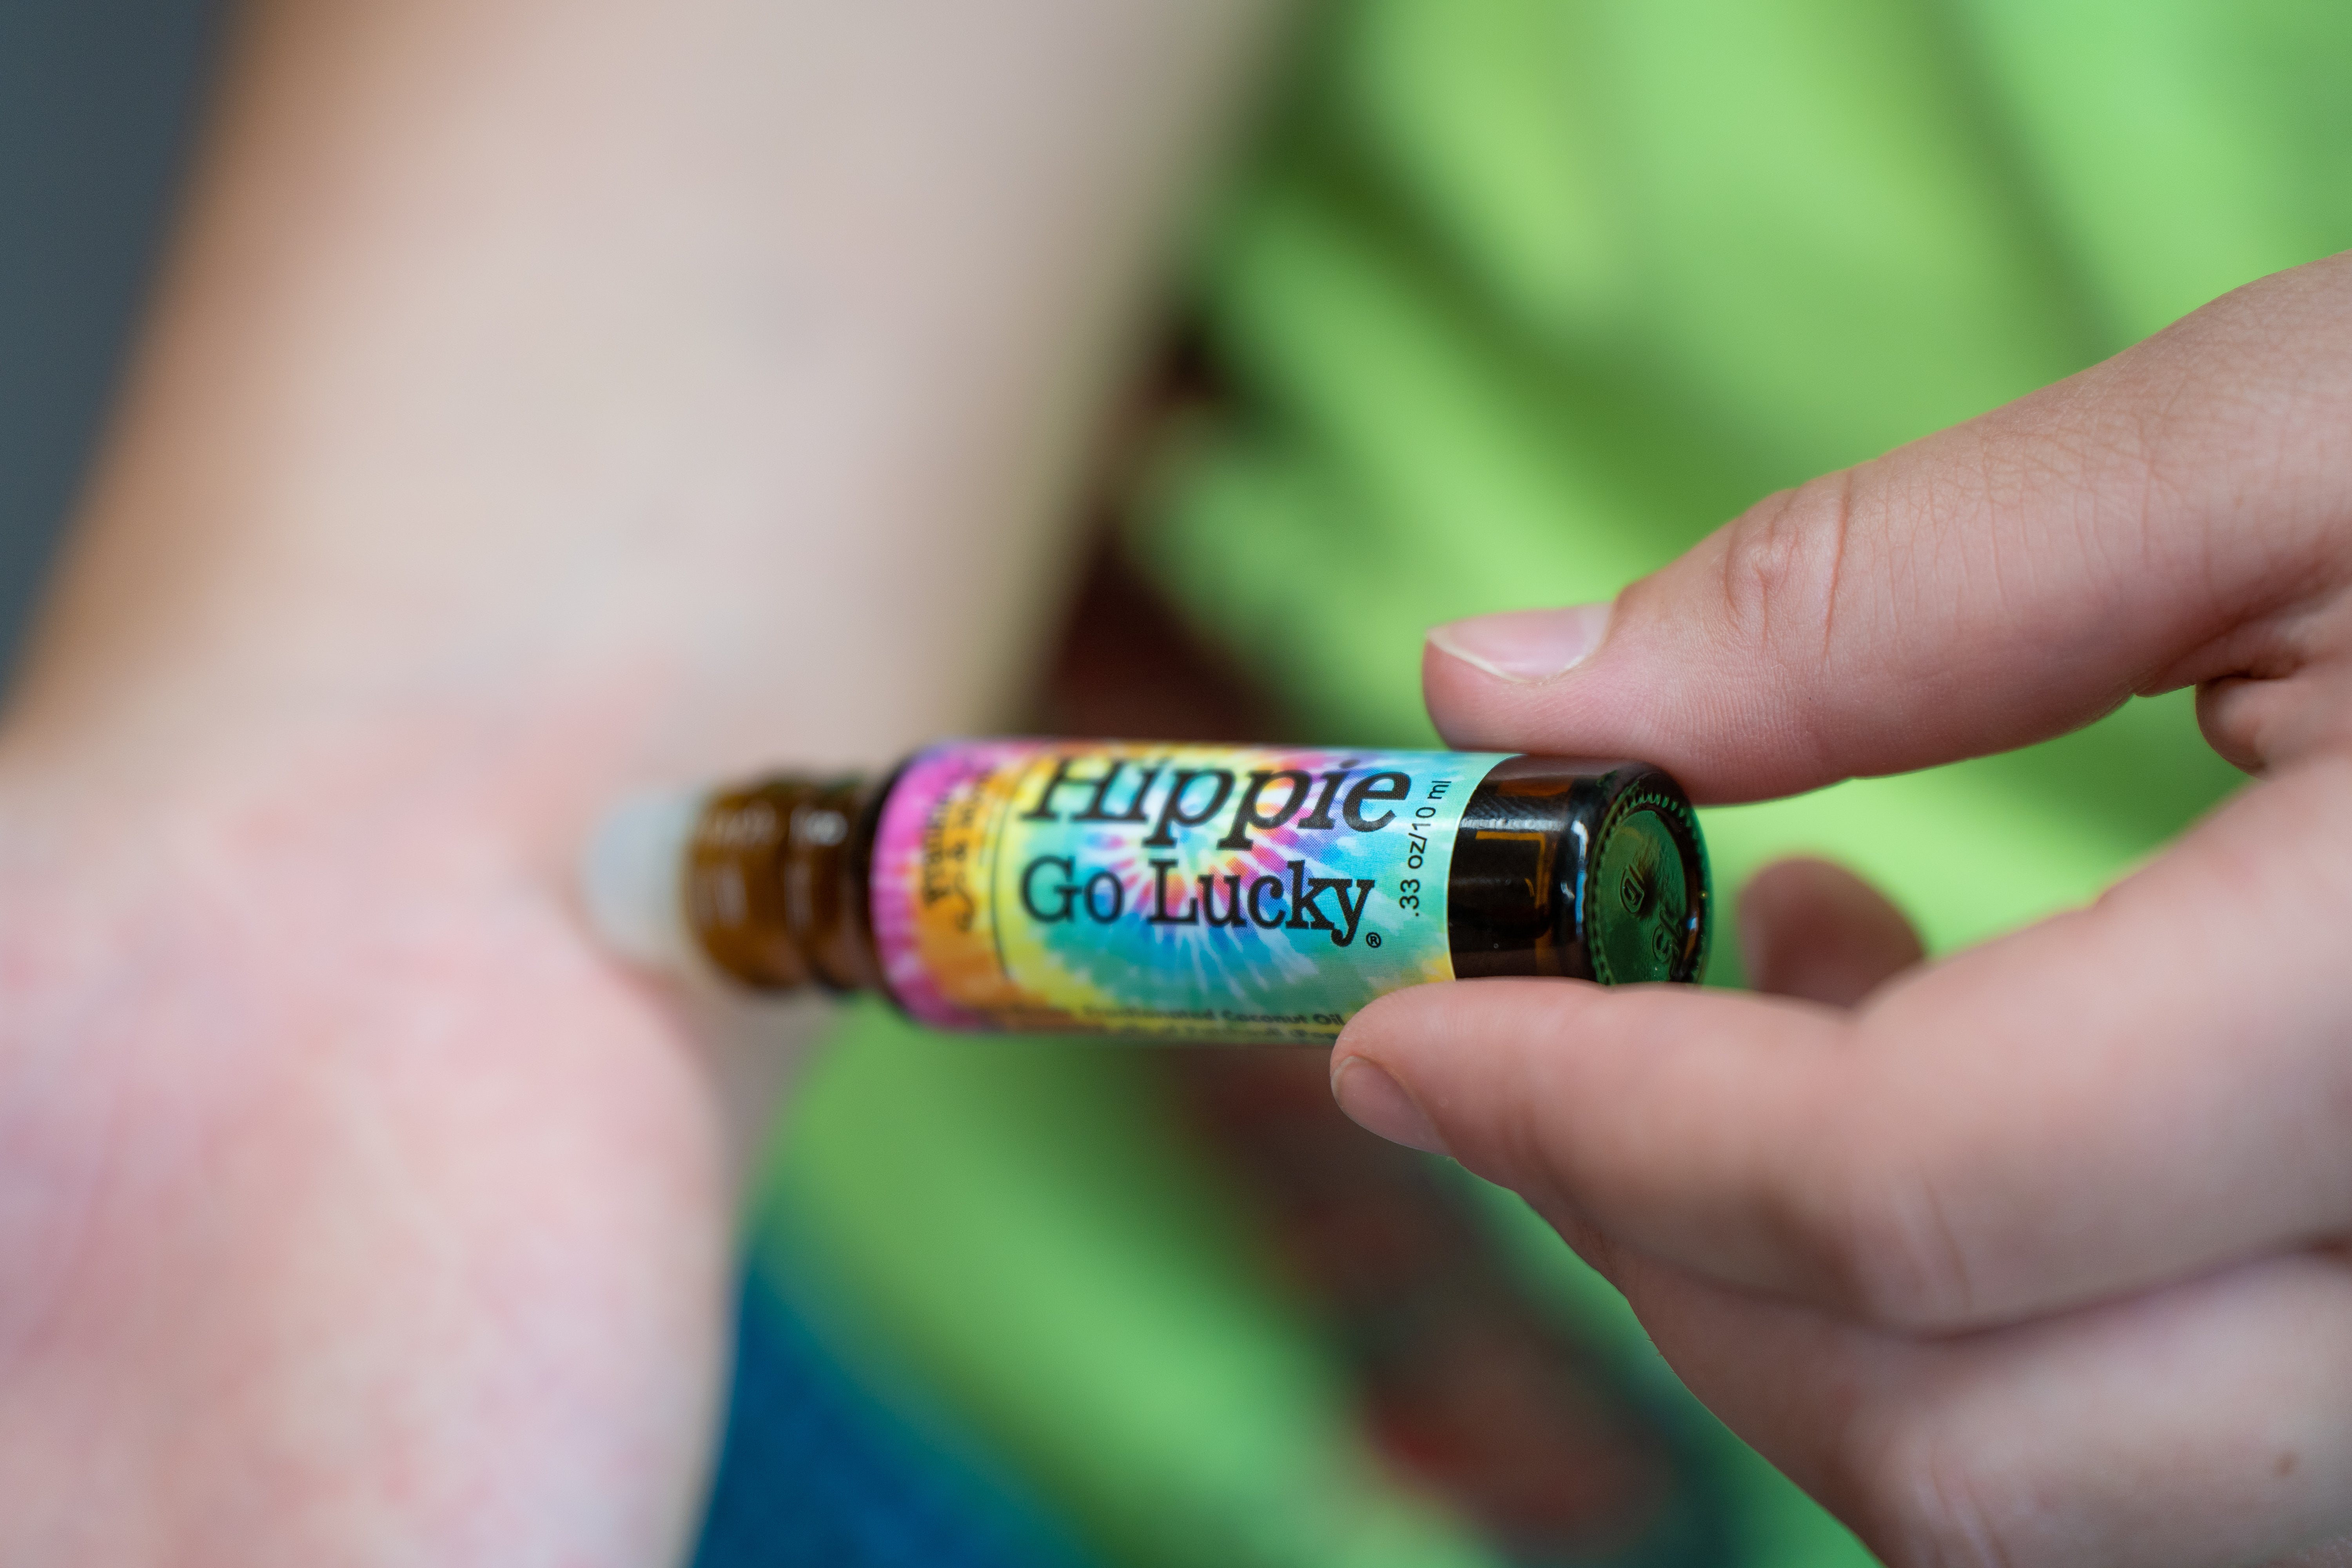 Hippie Go Lucky Roll-on | Patchouli Grapefruit